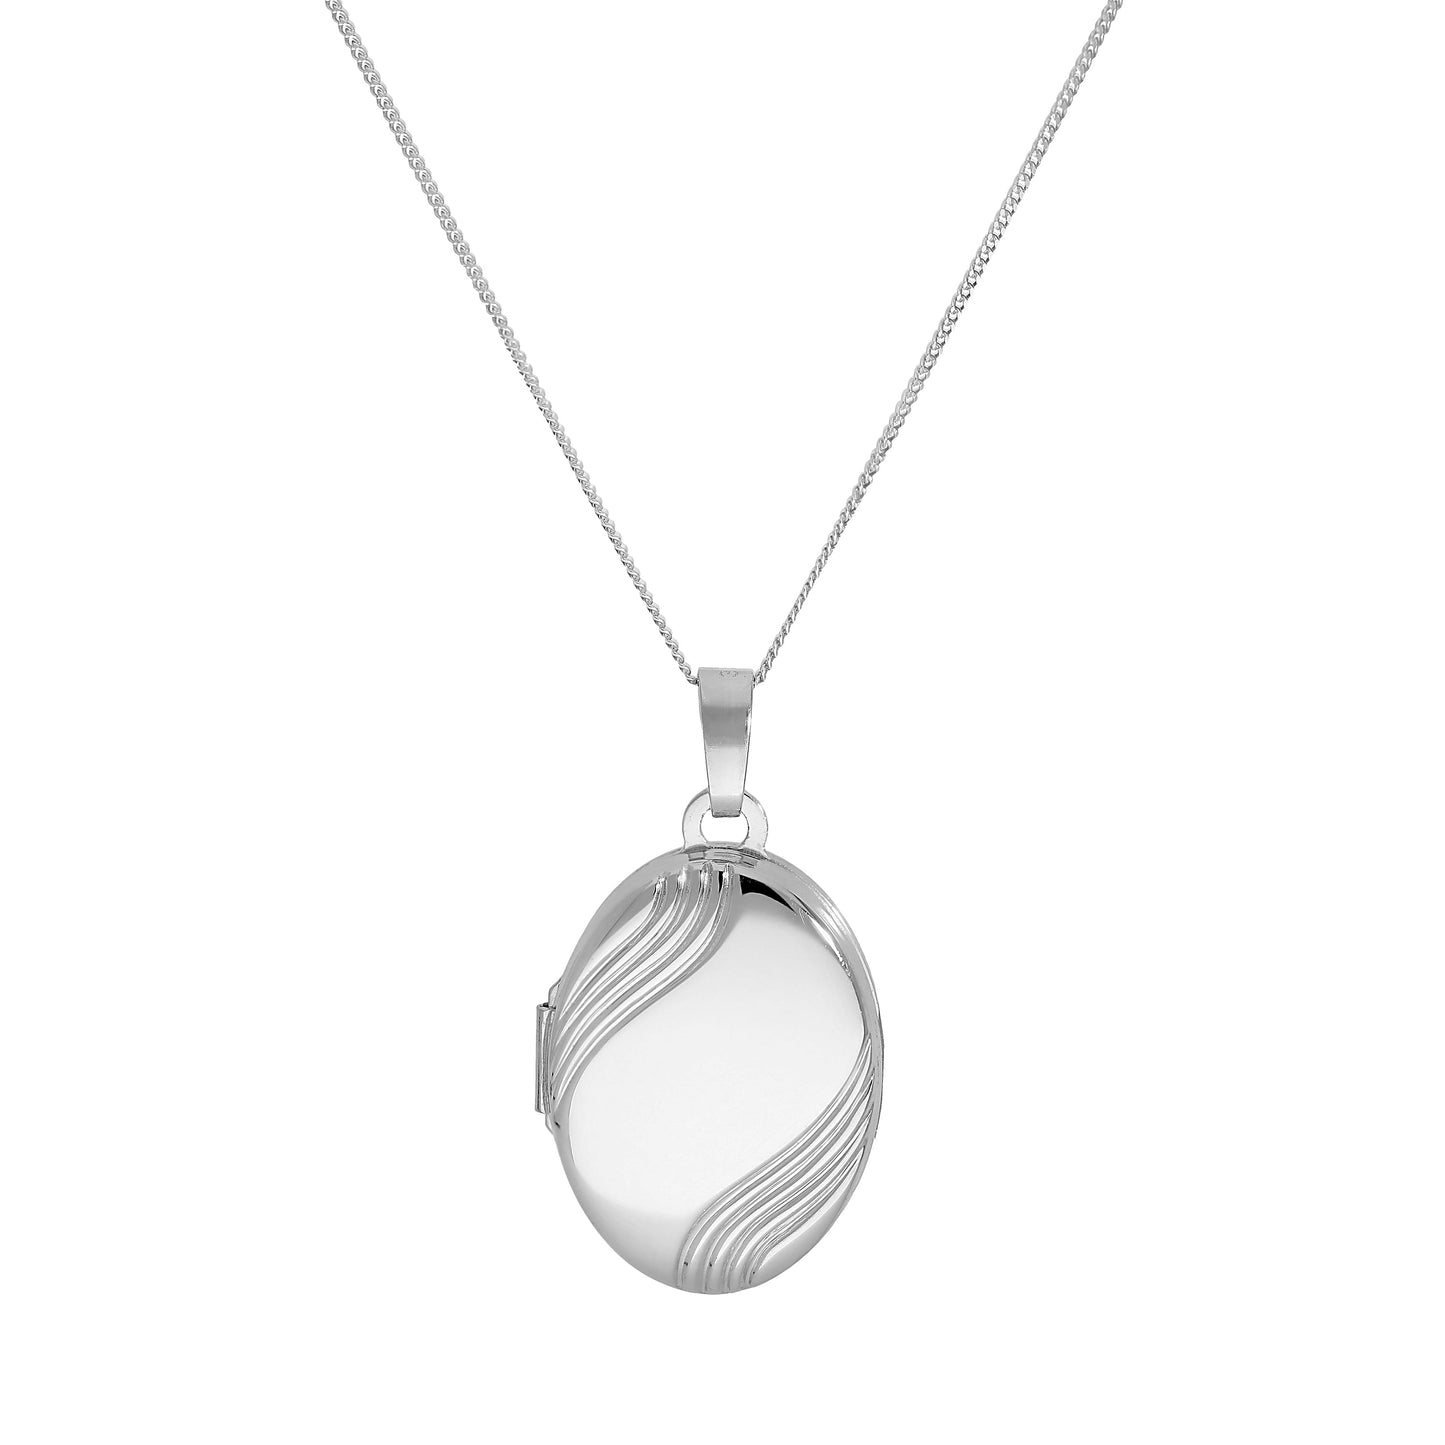 9ct White Gold Engravable Oval Locket with Wavy Design on Chain 16 - 18 Inches